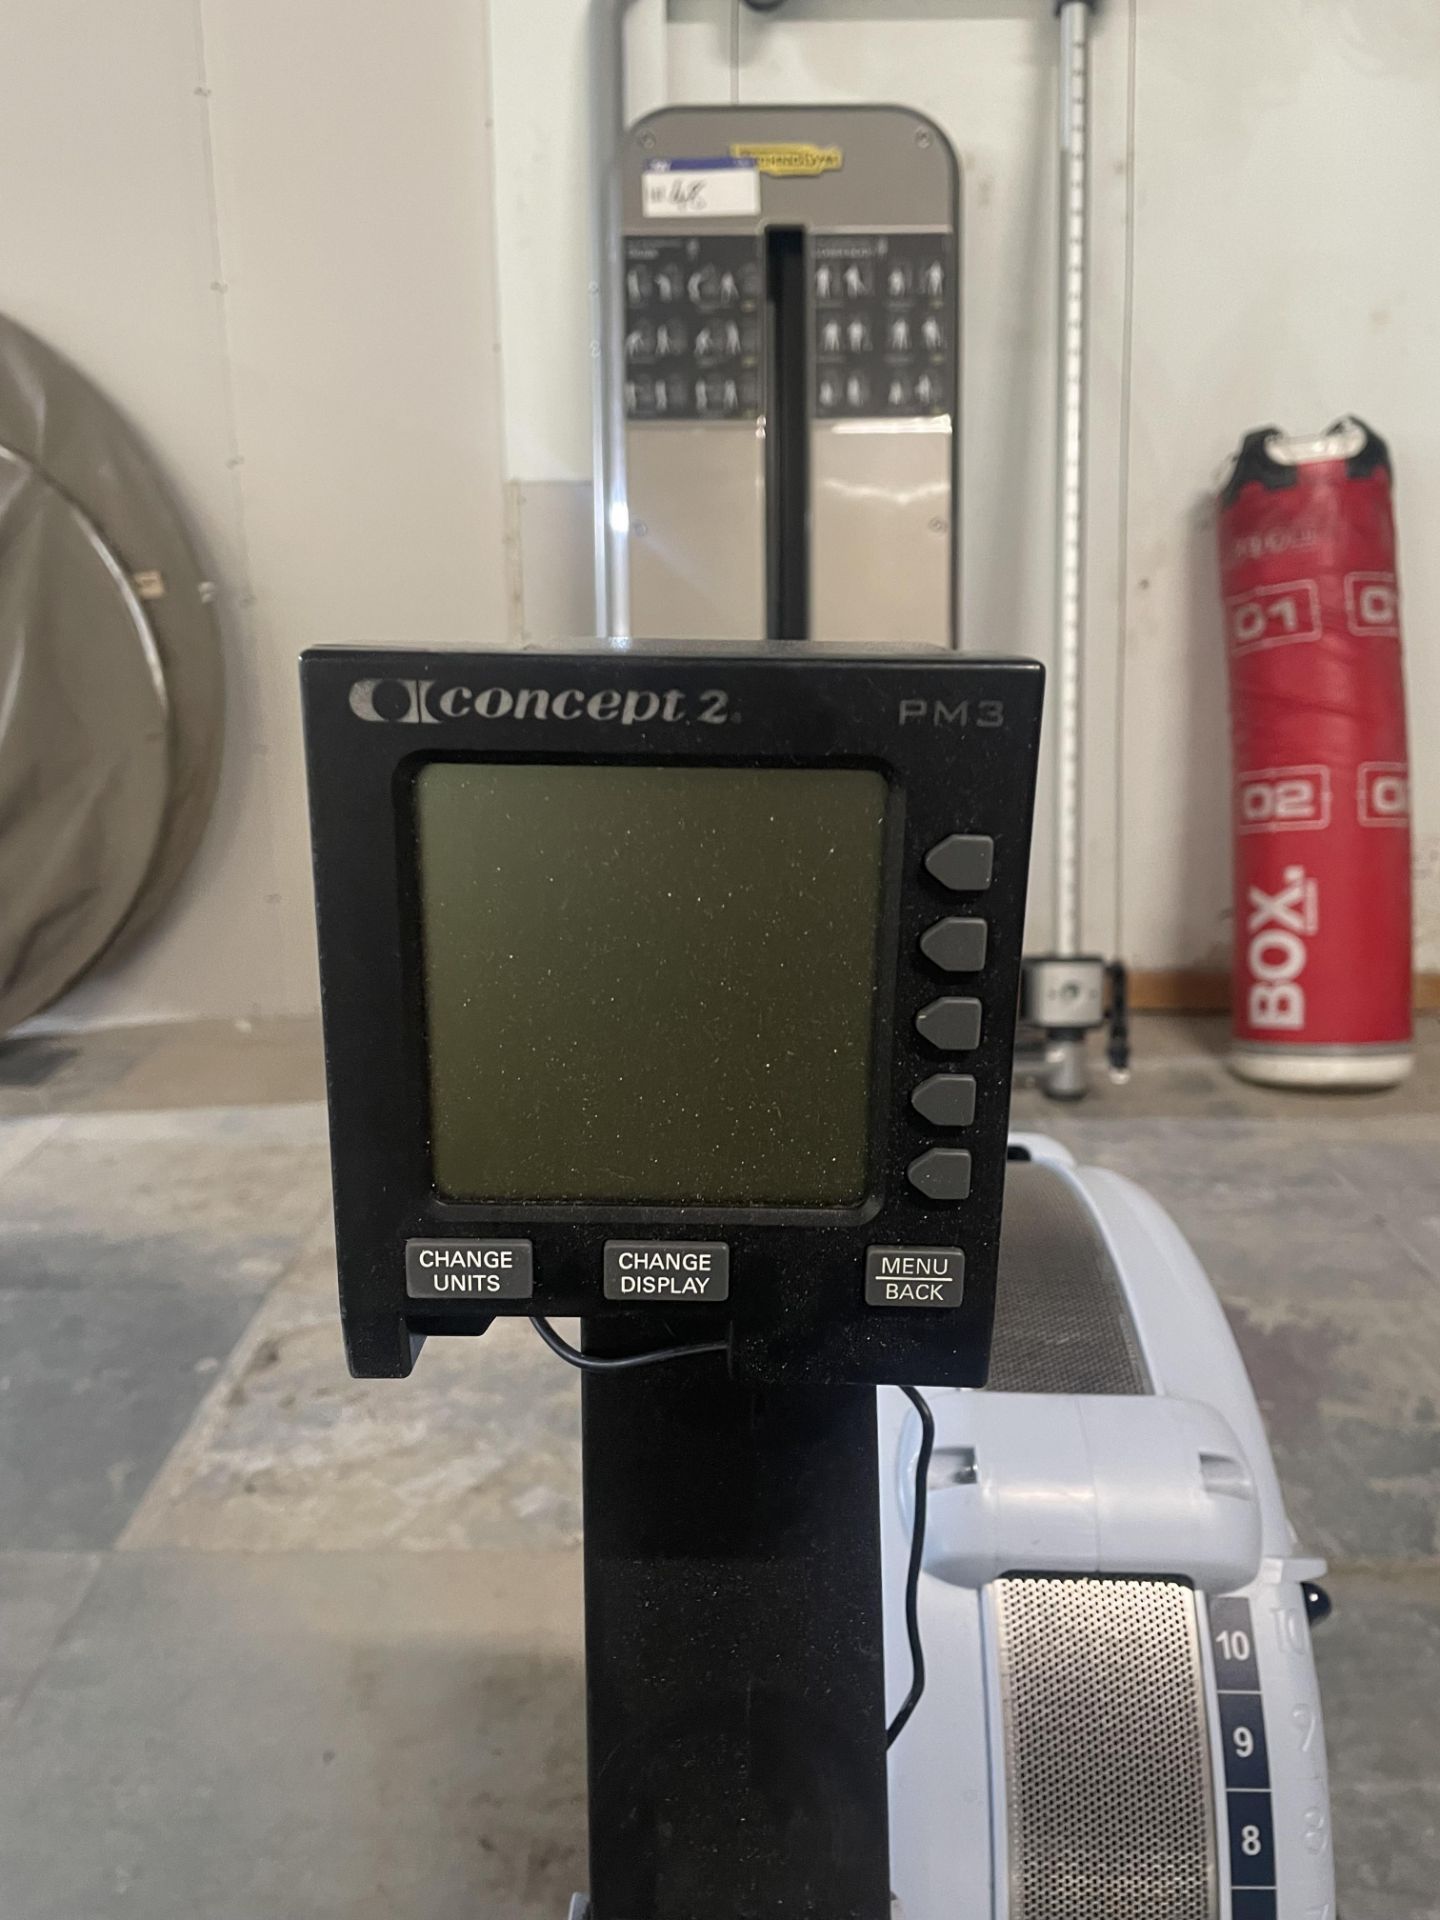 Concept2 PN3 Rowing Machine - Image 5 of 6